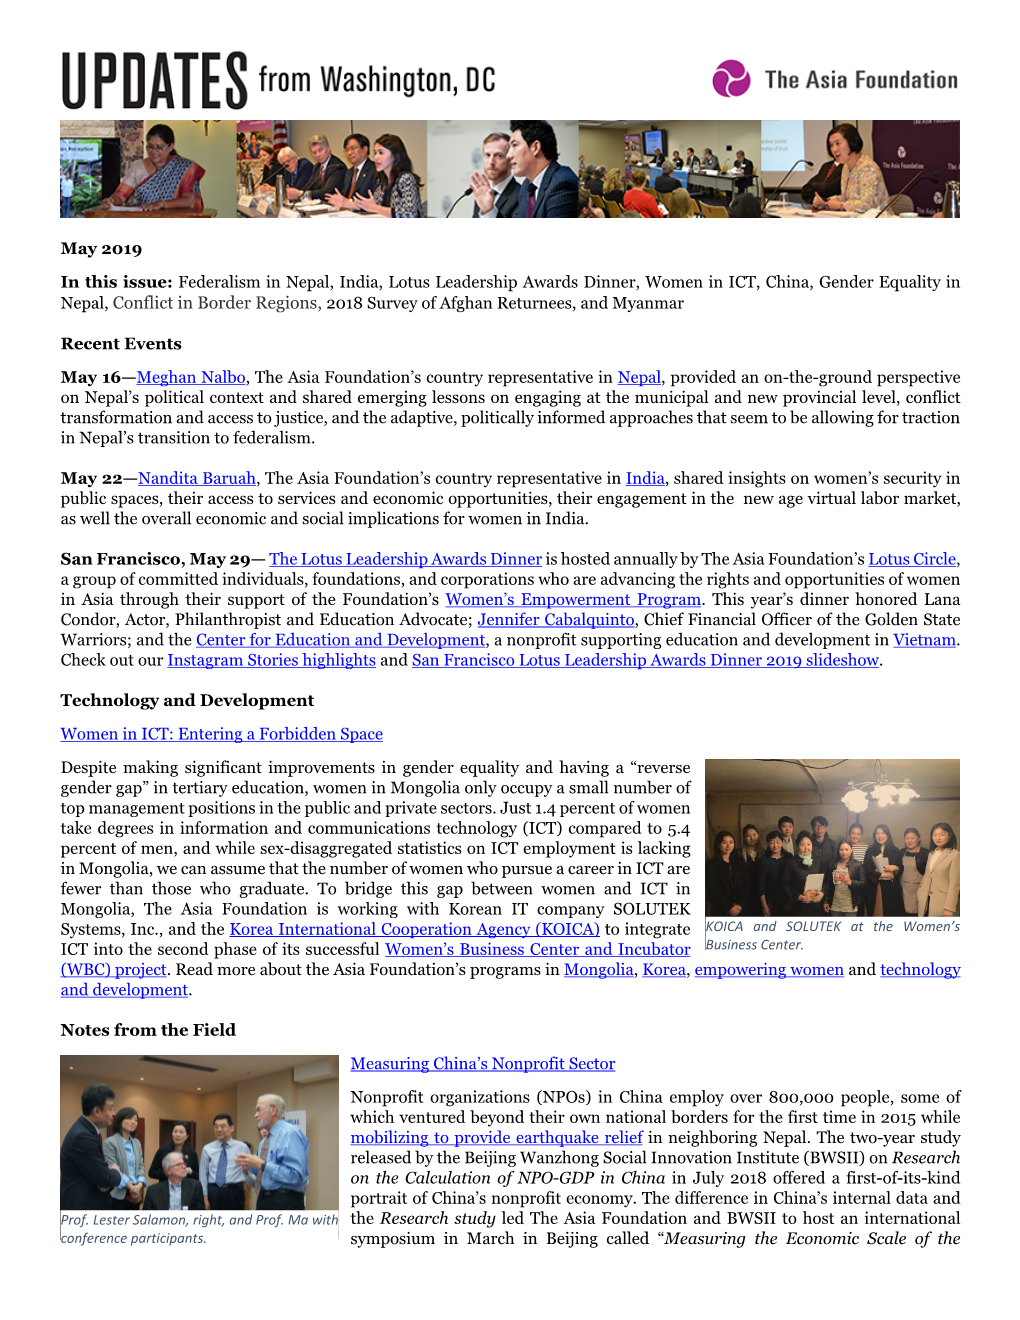 May 2019 in This Issue: Federalism in Nepal, India, Lotus Leadership